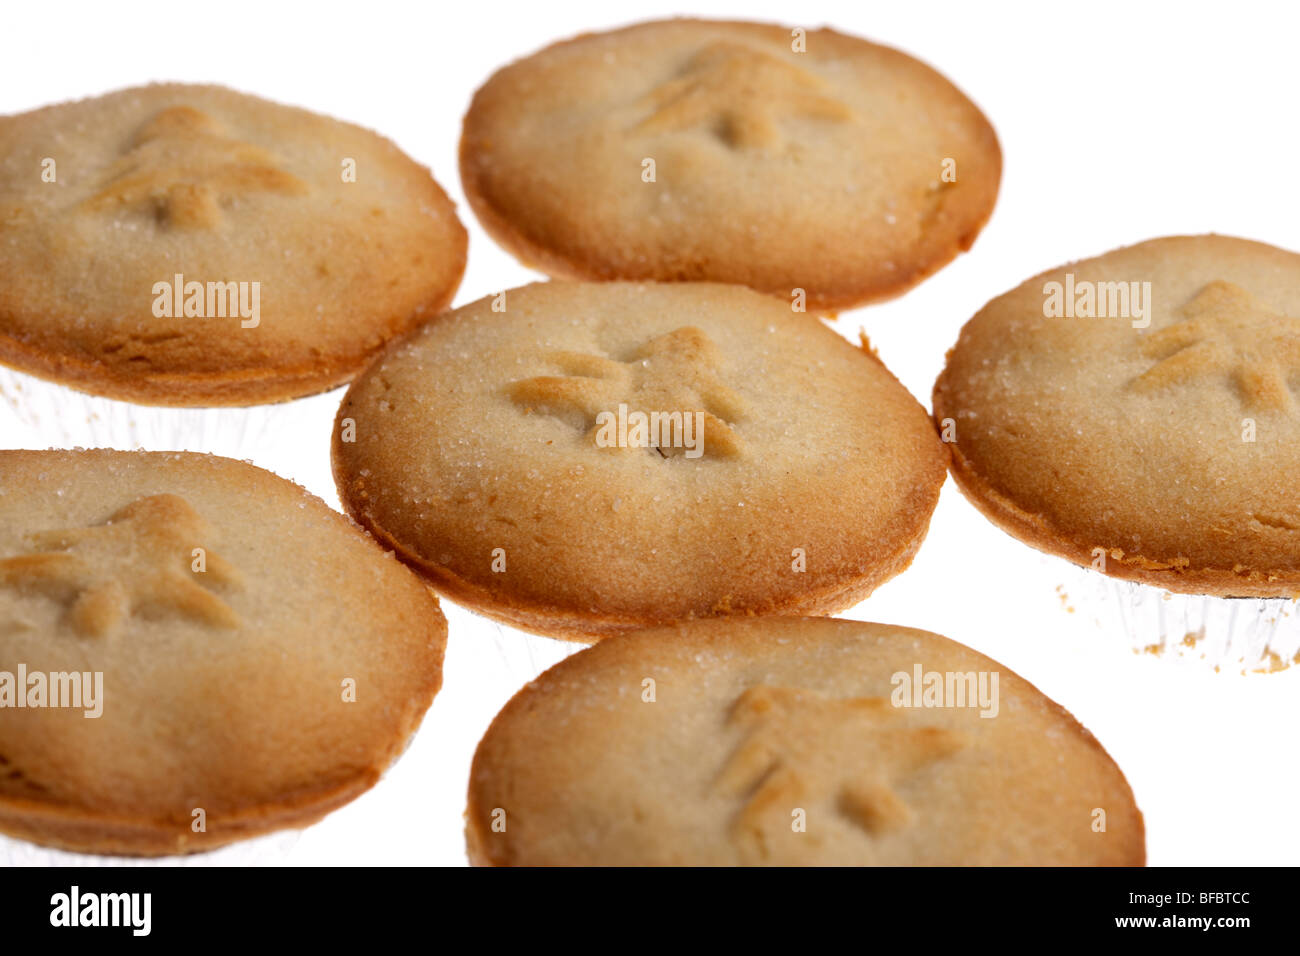 mince pies on a white background Stock Photo